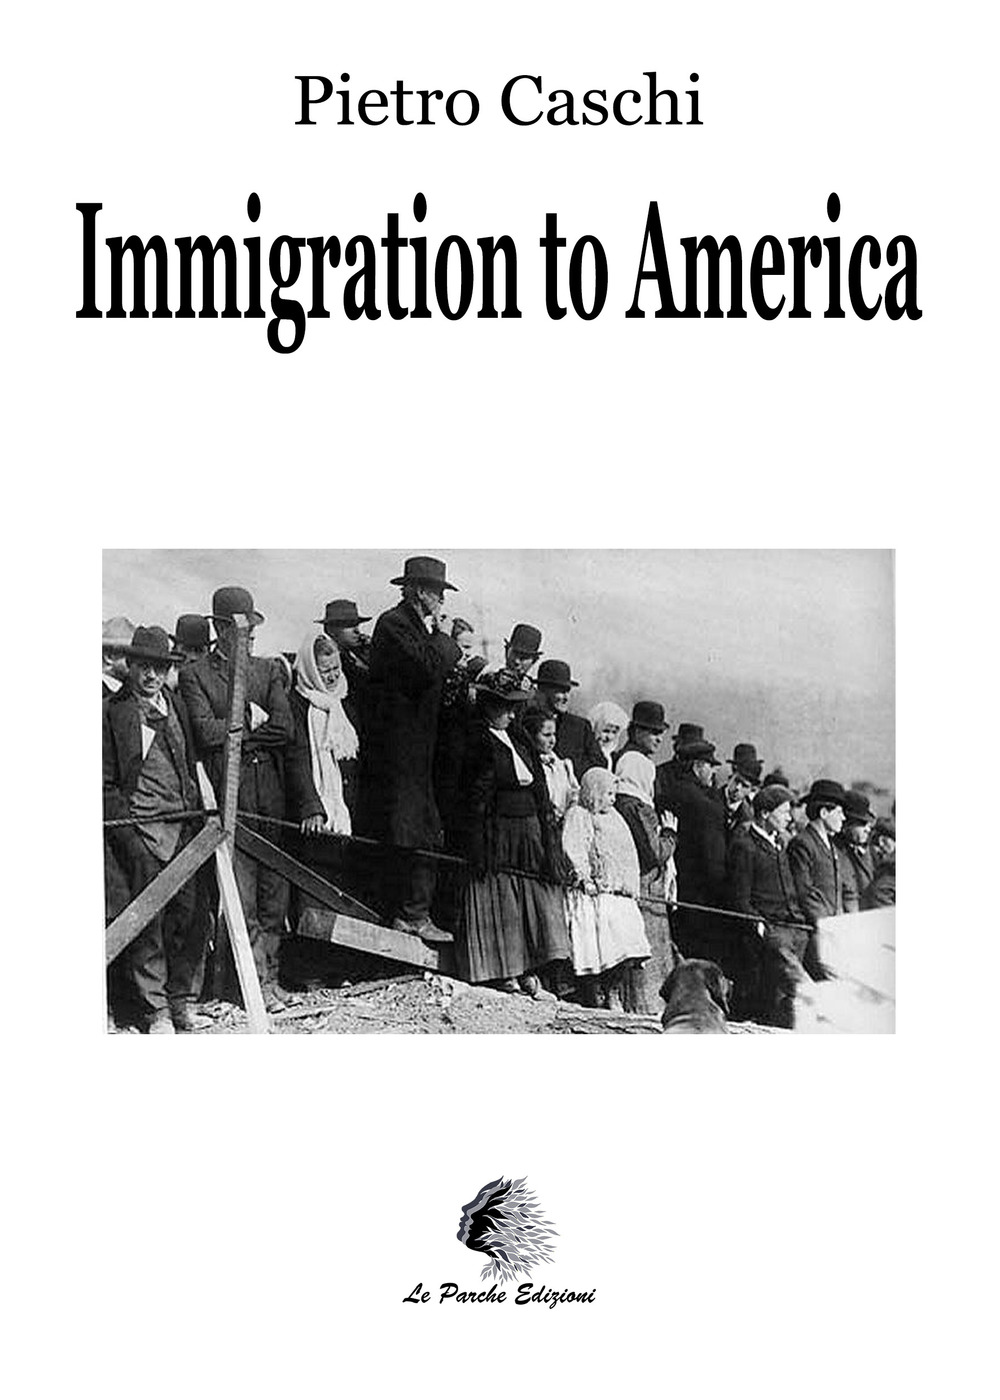 Immigration to America. From suffering to joy